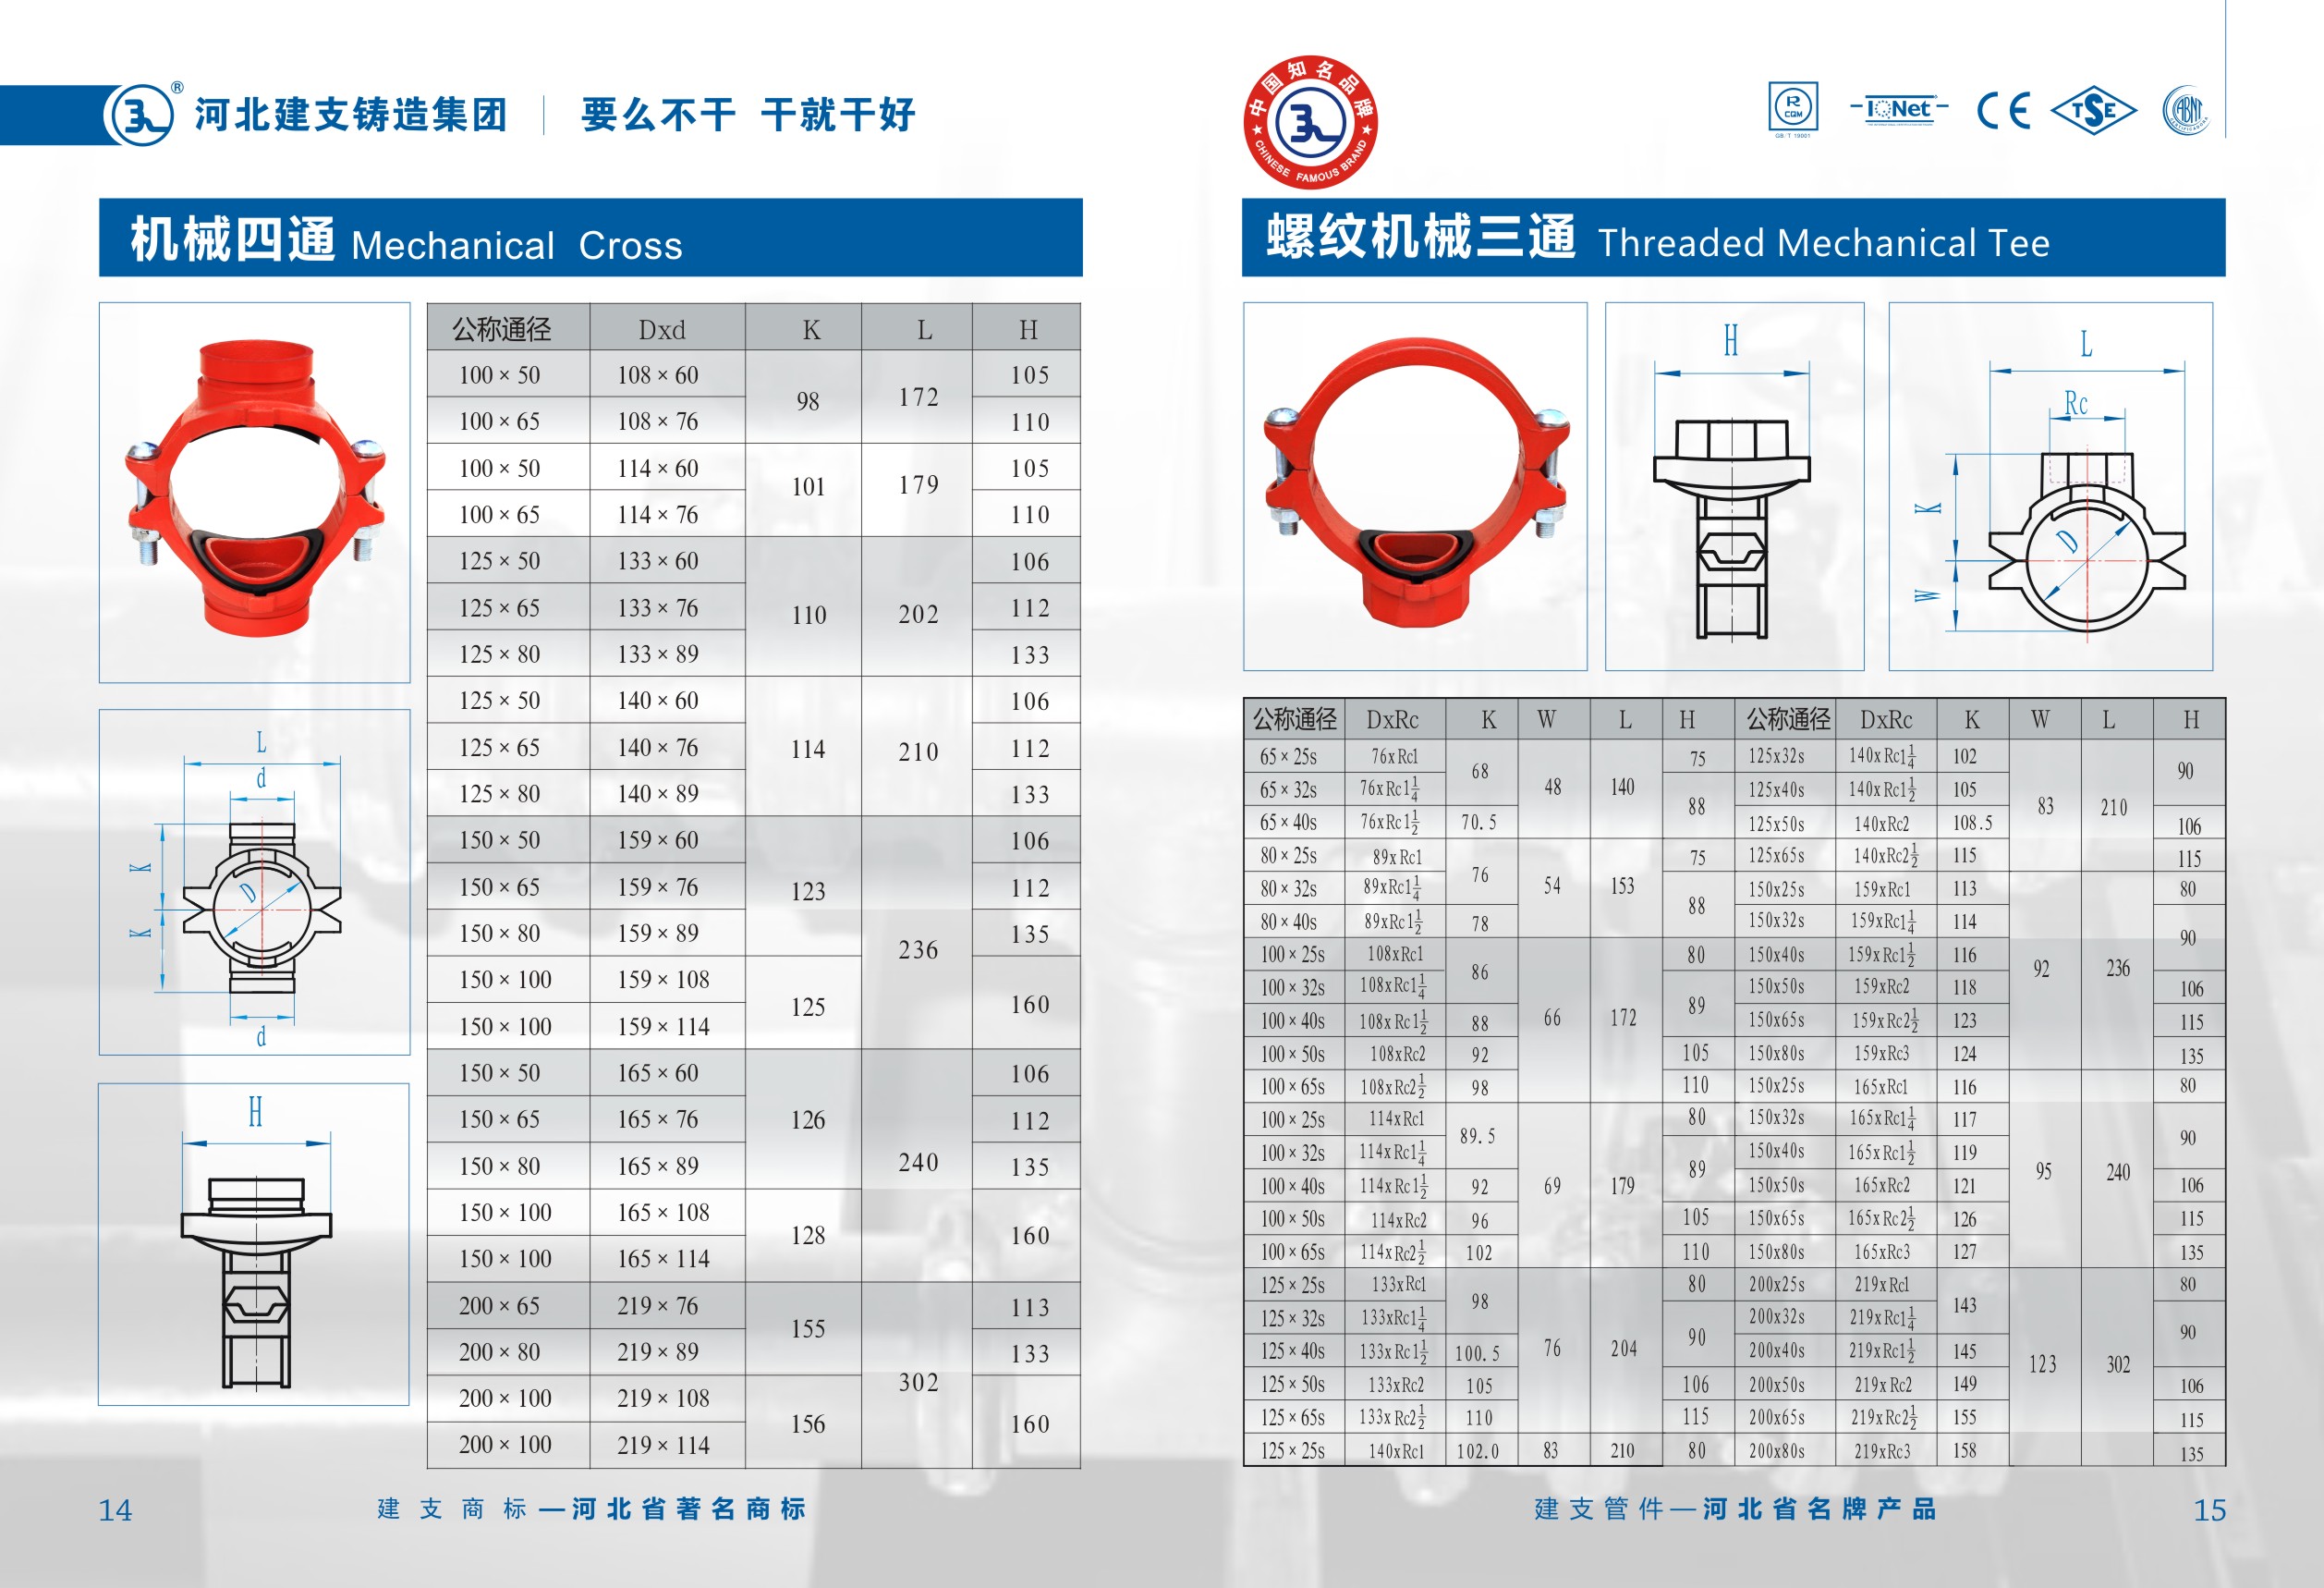 Manufacturer and distributor of standard and custom ductile iron pipe fittings. Standard iron couplings are available. Offered in 2 in., 2 1/2 in., 3 in. 4 in. and